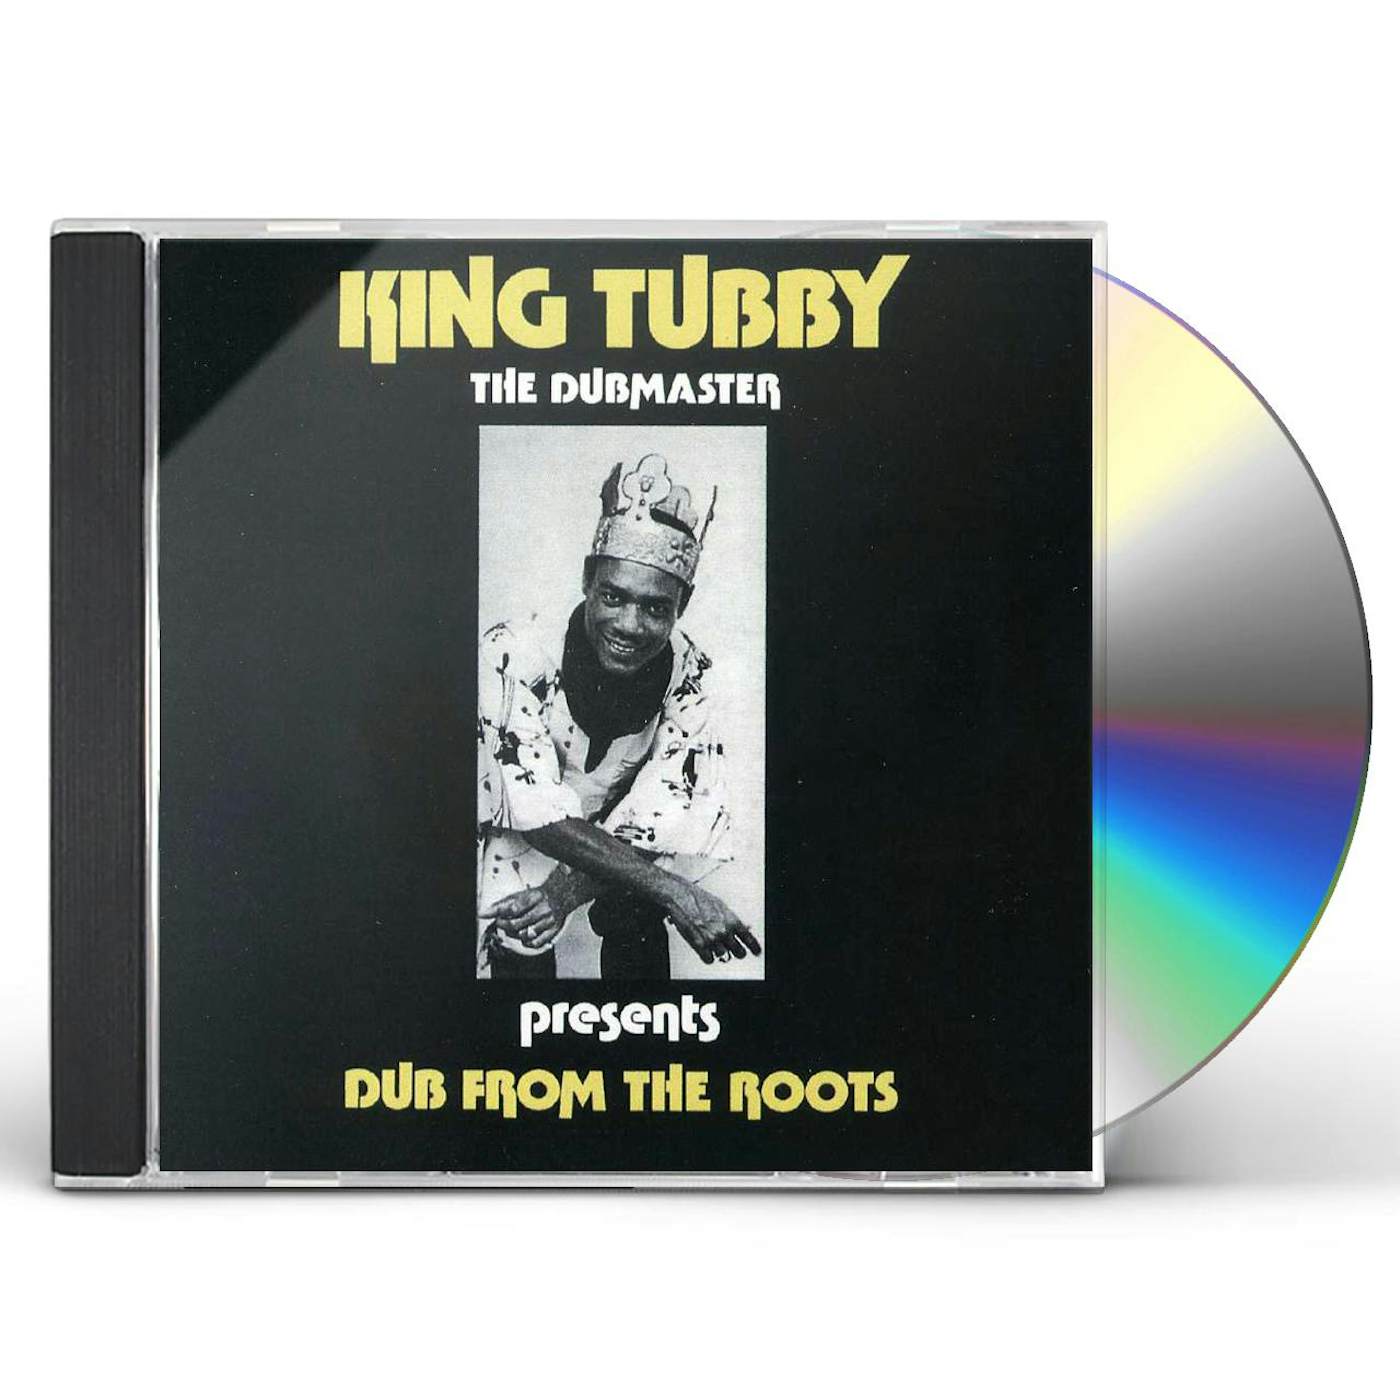 King Tubby DUB FROM THE ROOTS CD